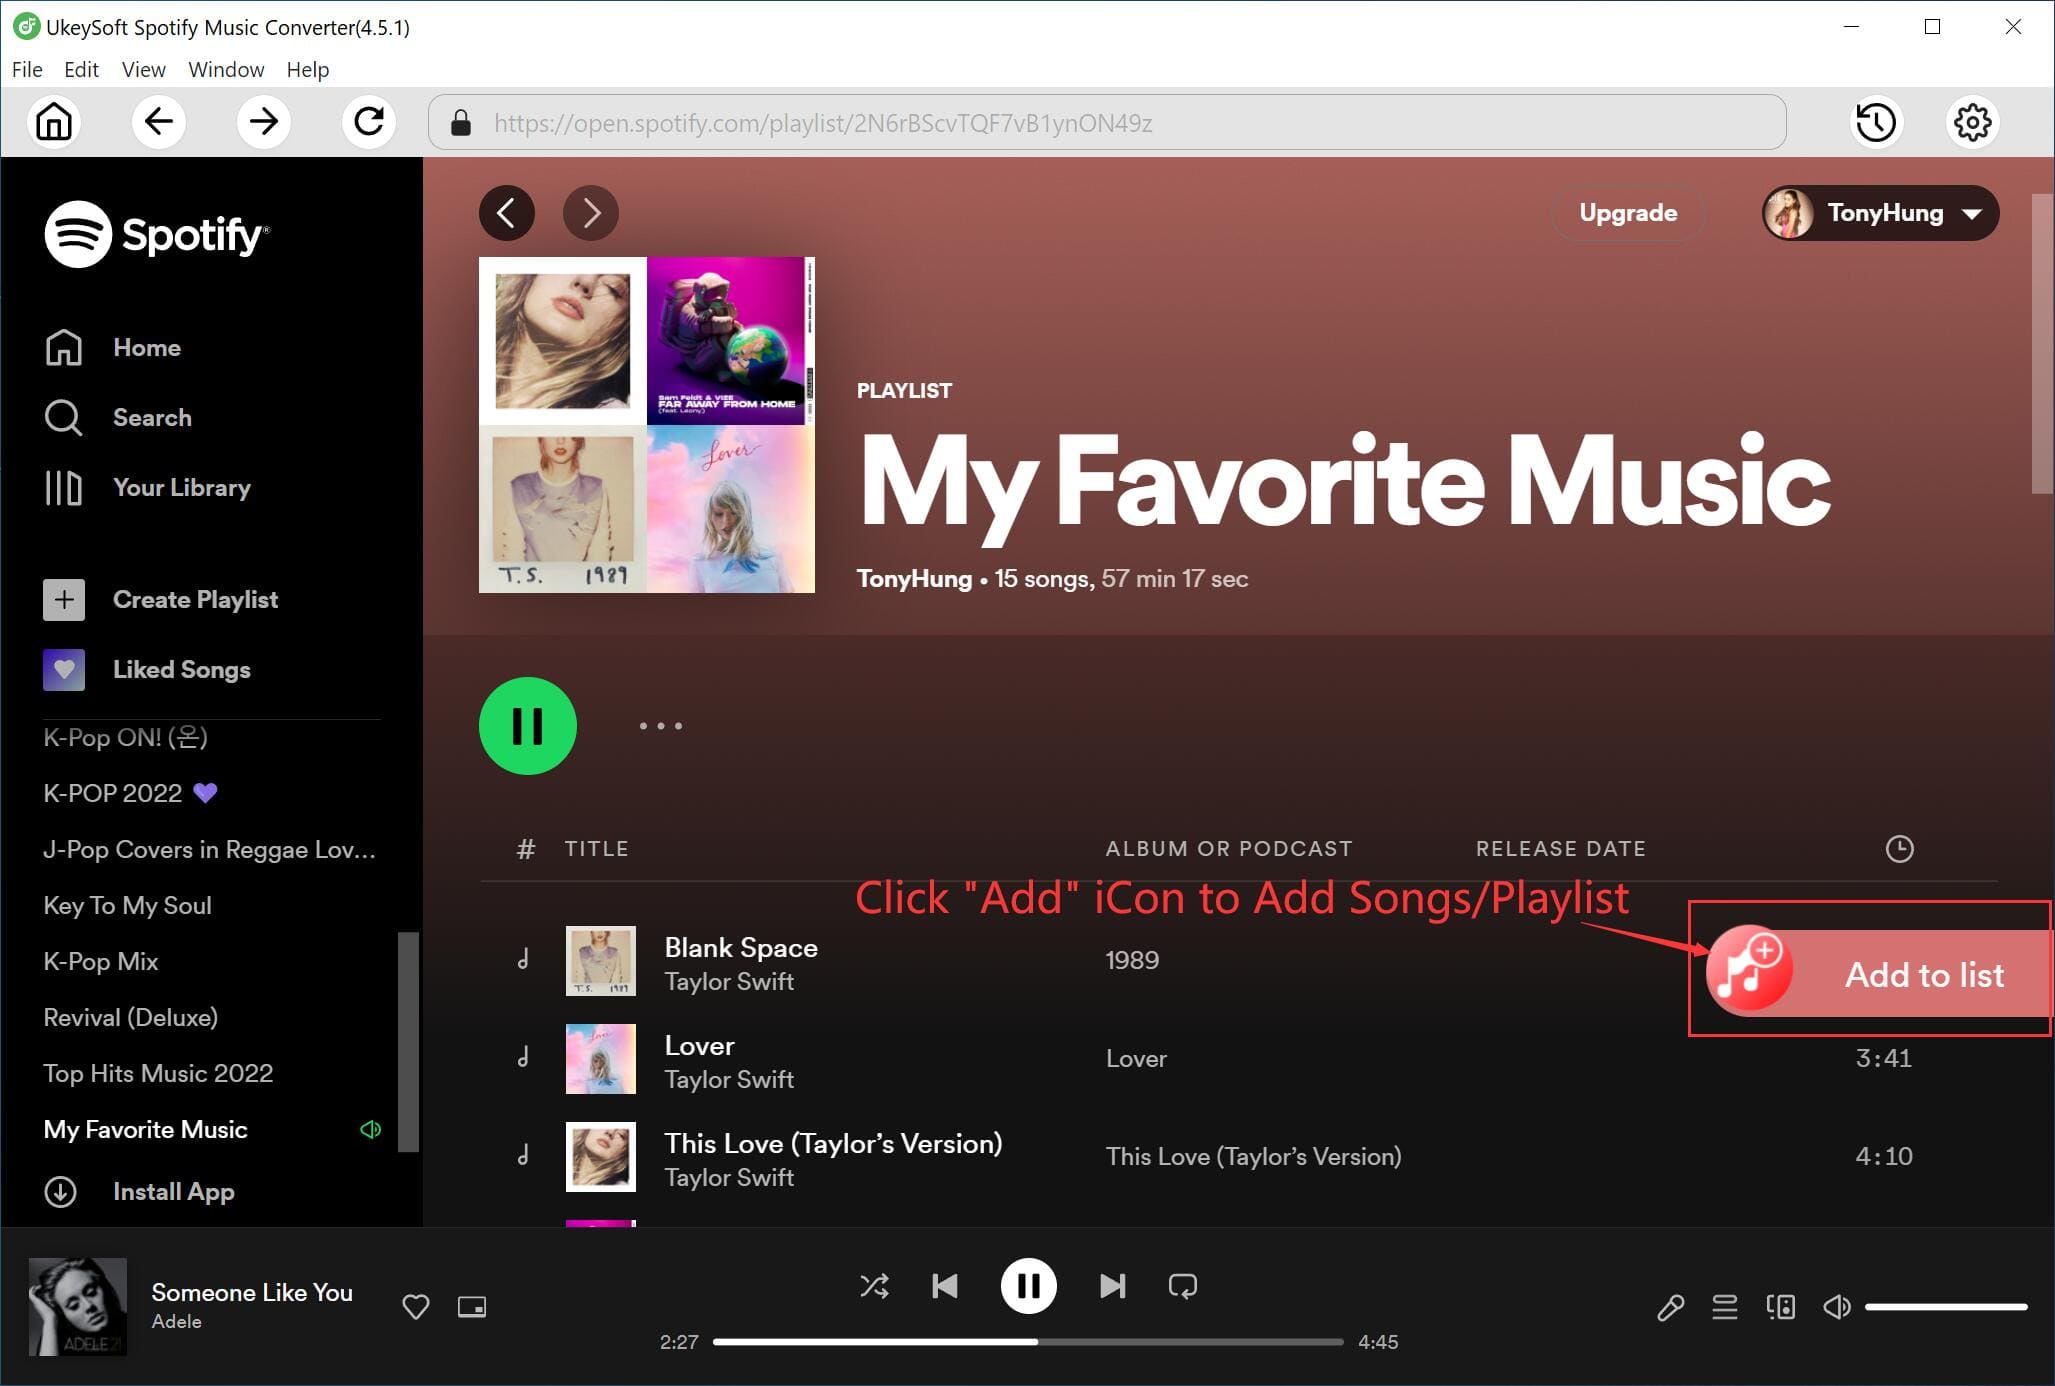 spotify songs to mp3